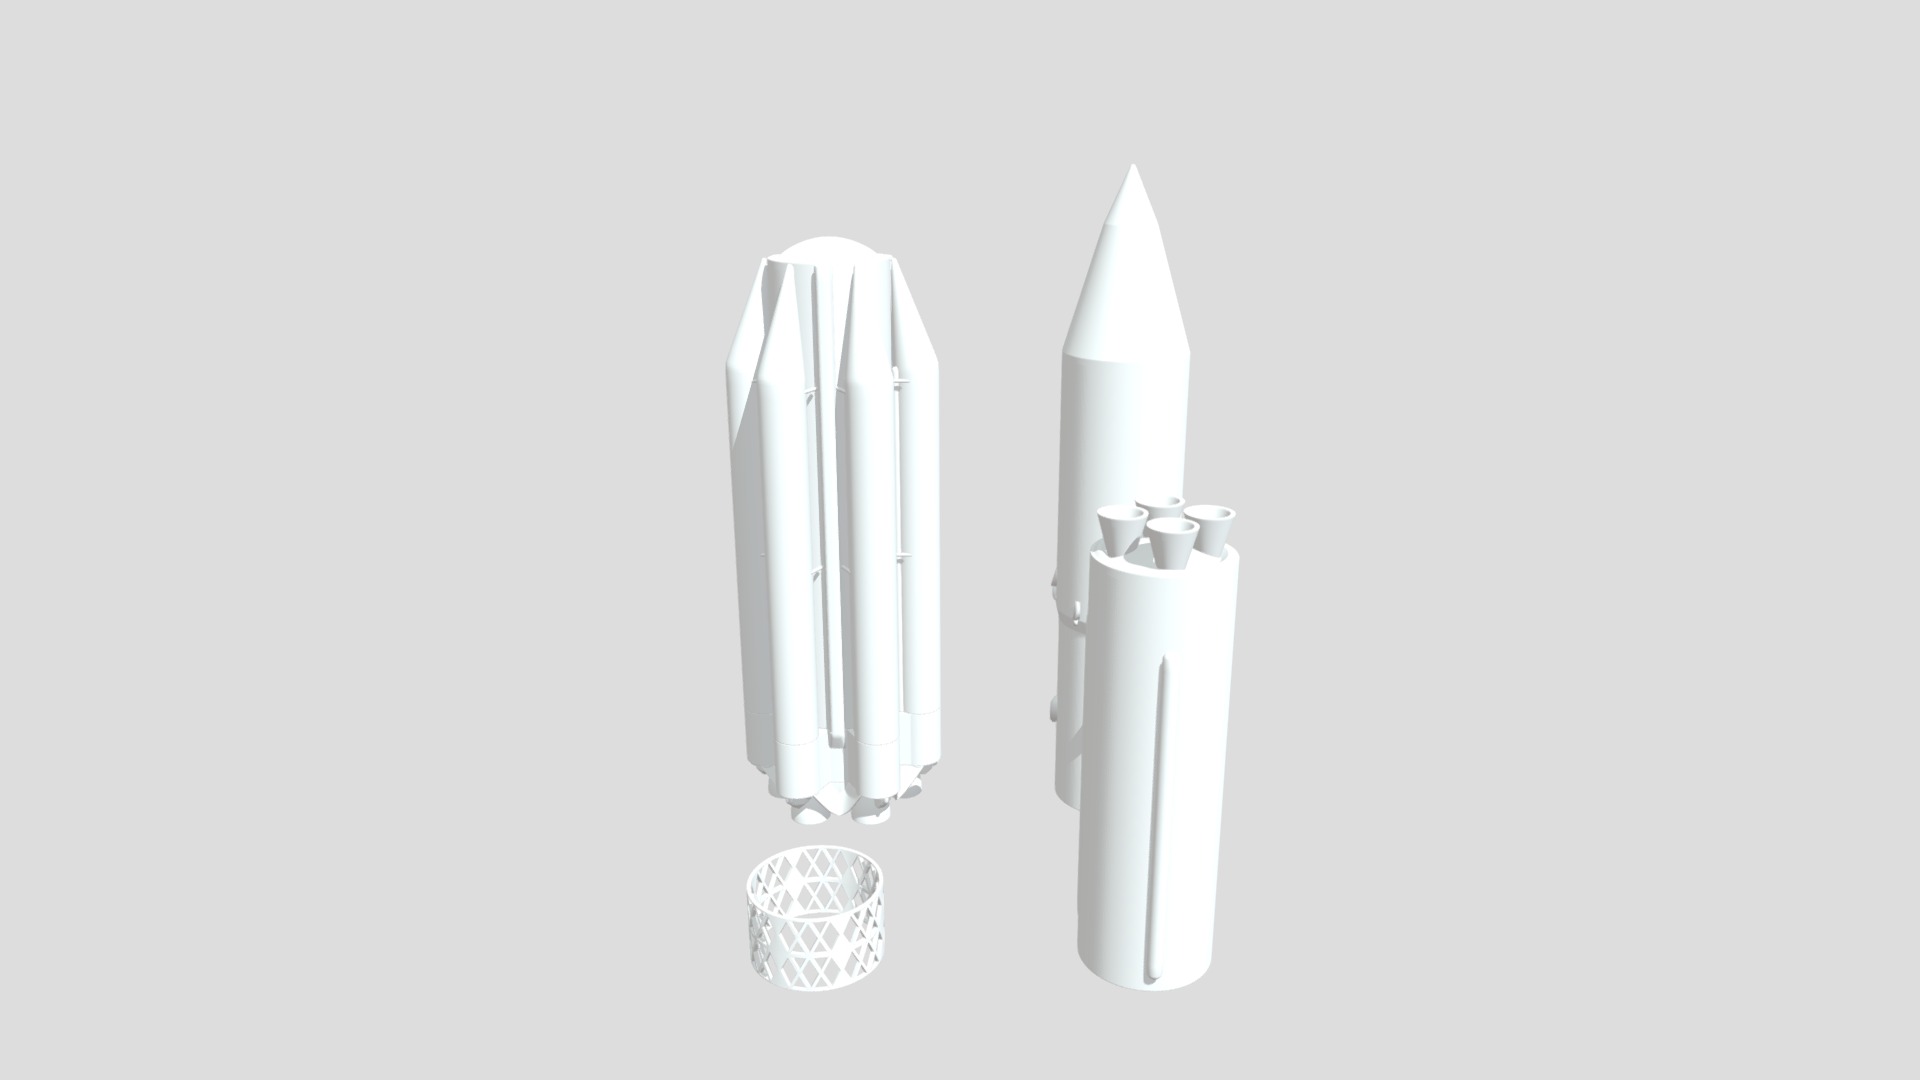 3D model Proton-M - This is a 3D model of the Proton-M. The 3D model is about a few white toothbrushes.